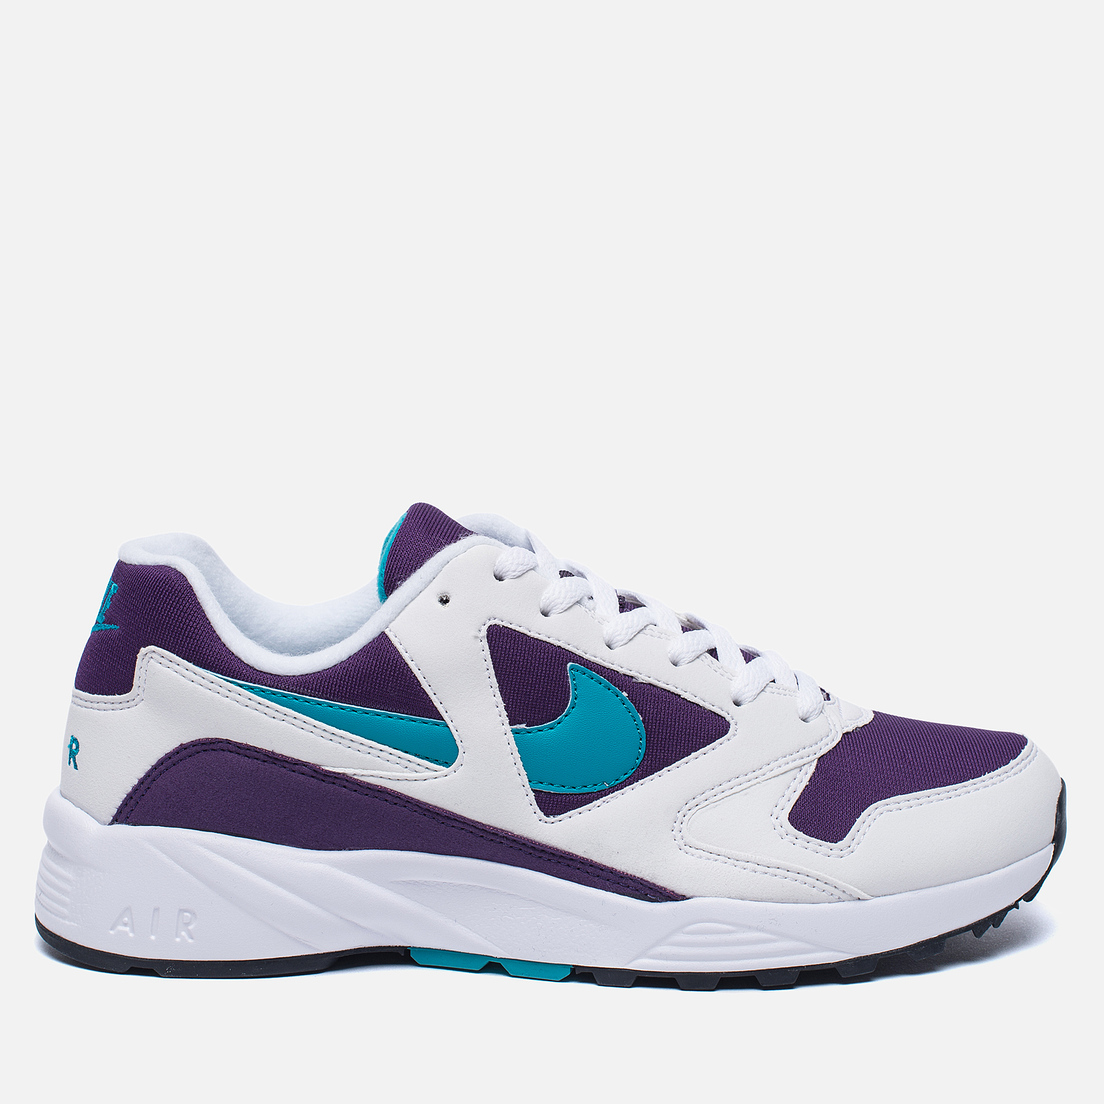 Nike Air Icarus Extra 875842-500